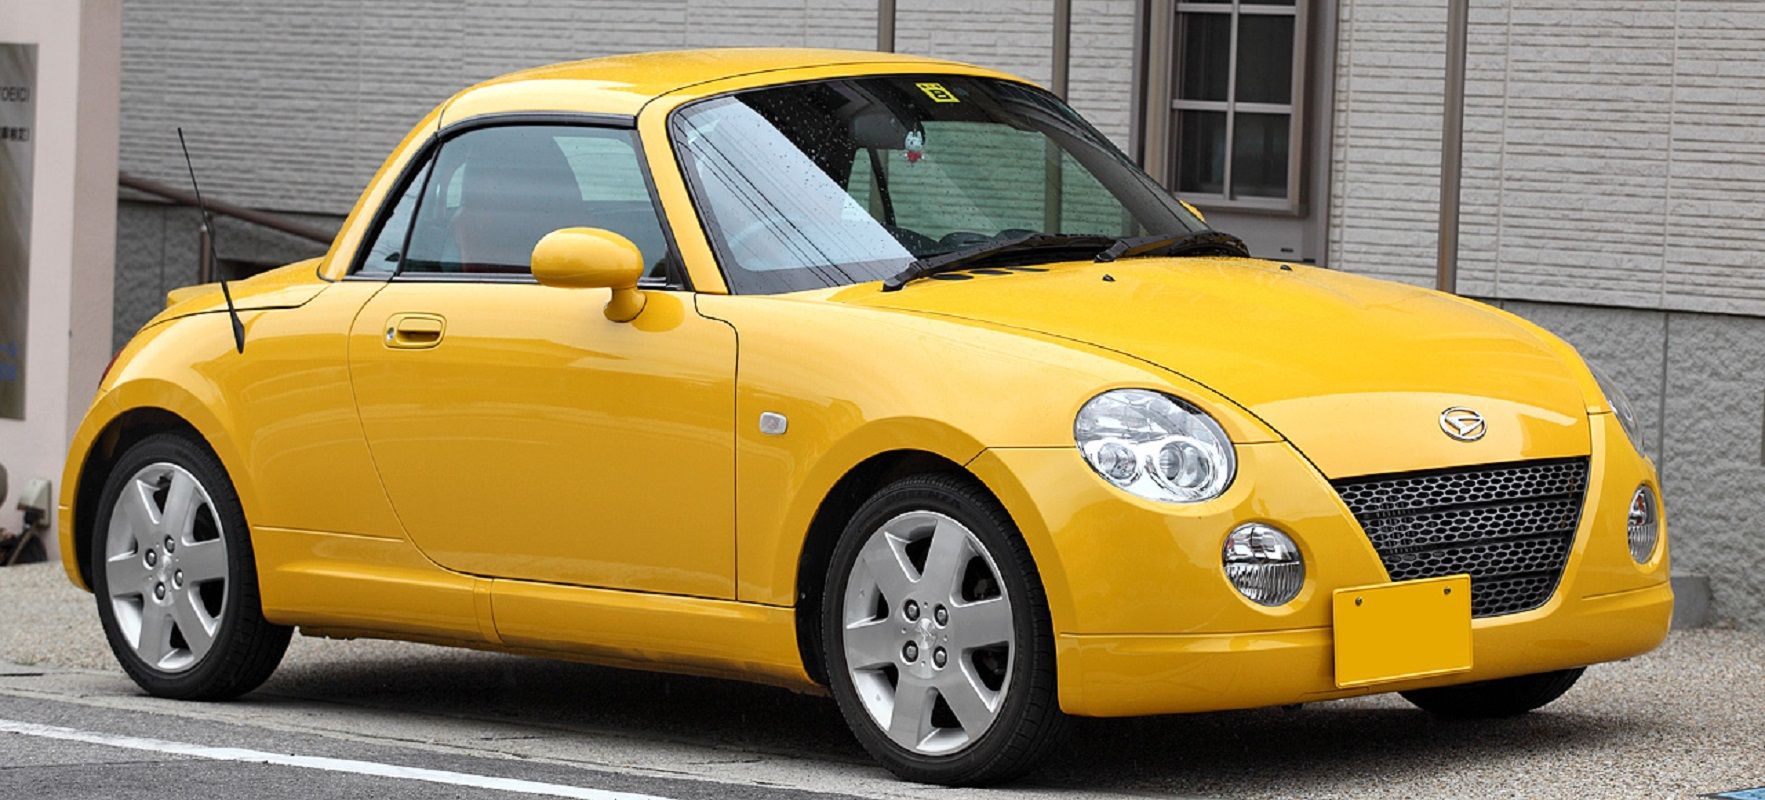 10 Weird And Wonderful Japanese Everyday Cars We Would Love To Drive